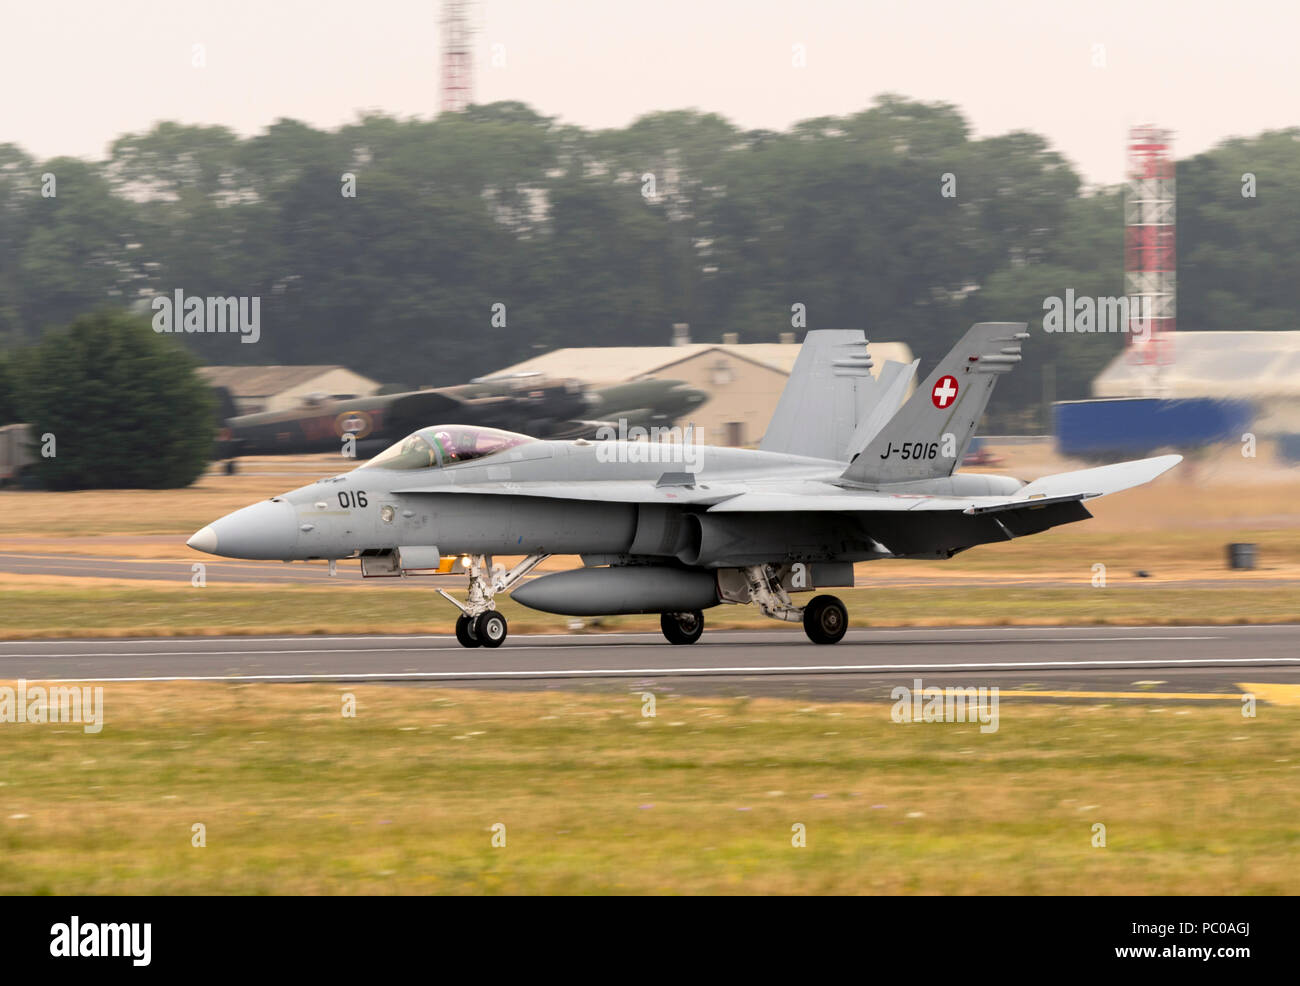 Boeing F/A 18C Hornet,Swedish Air Force, Banque D'Images